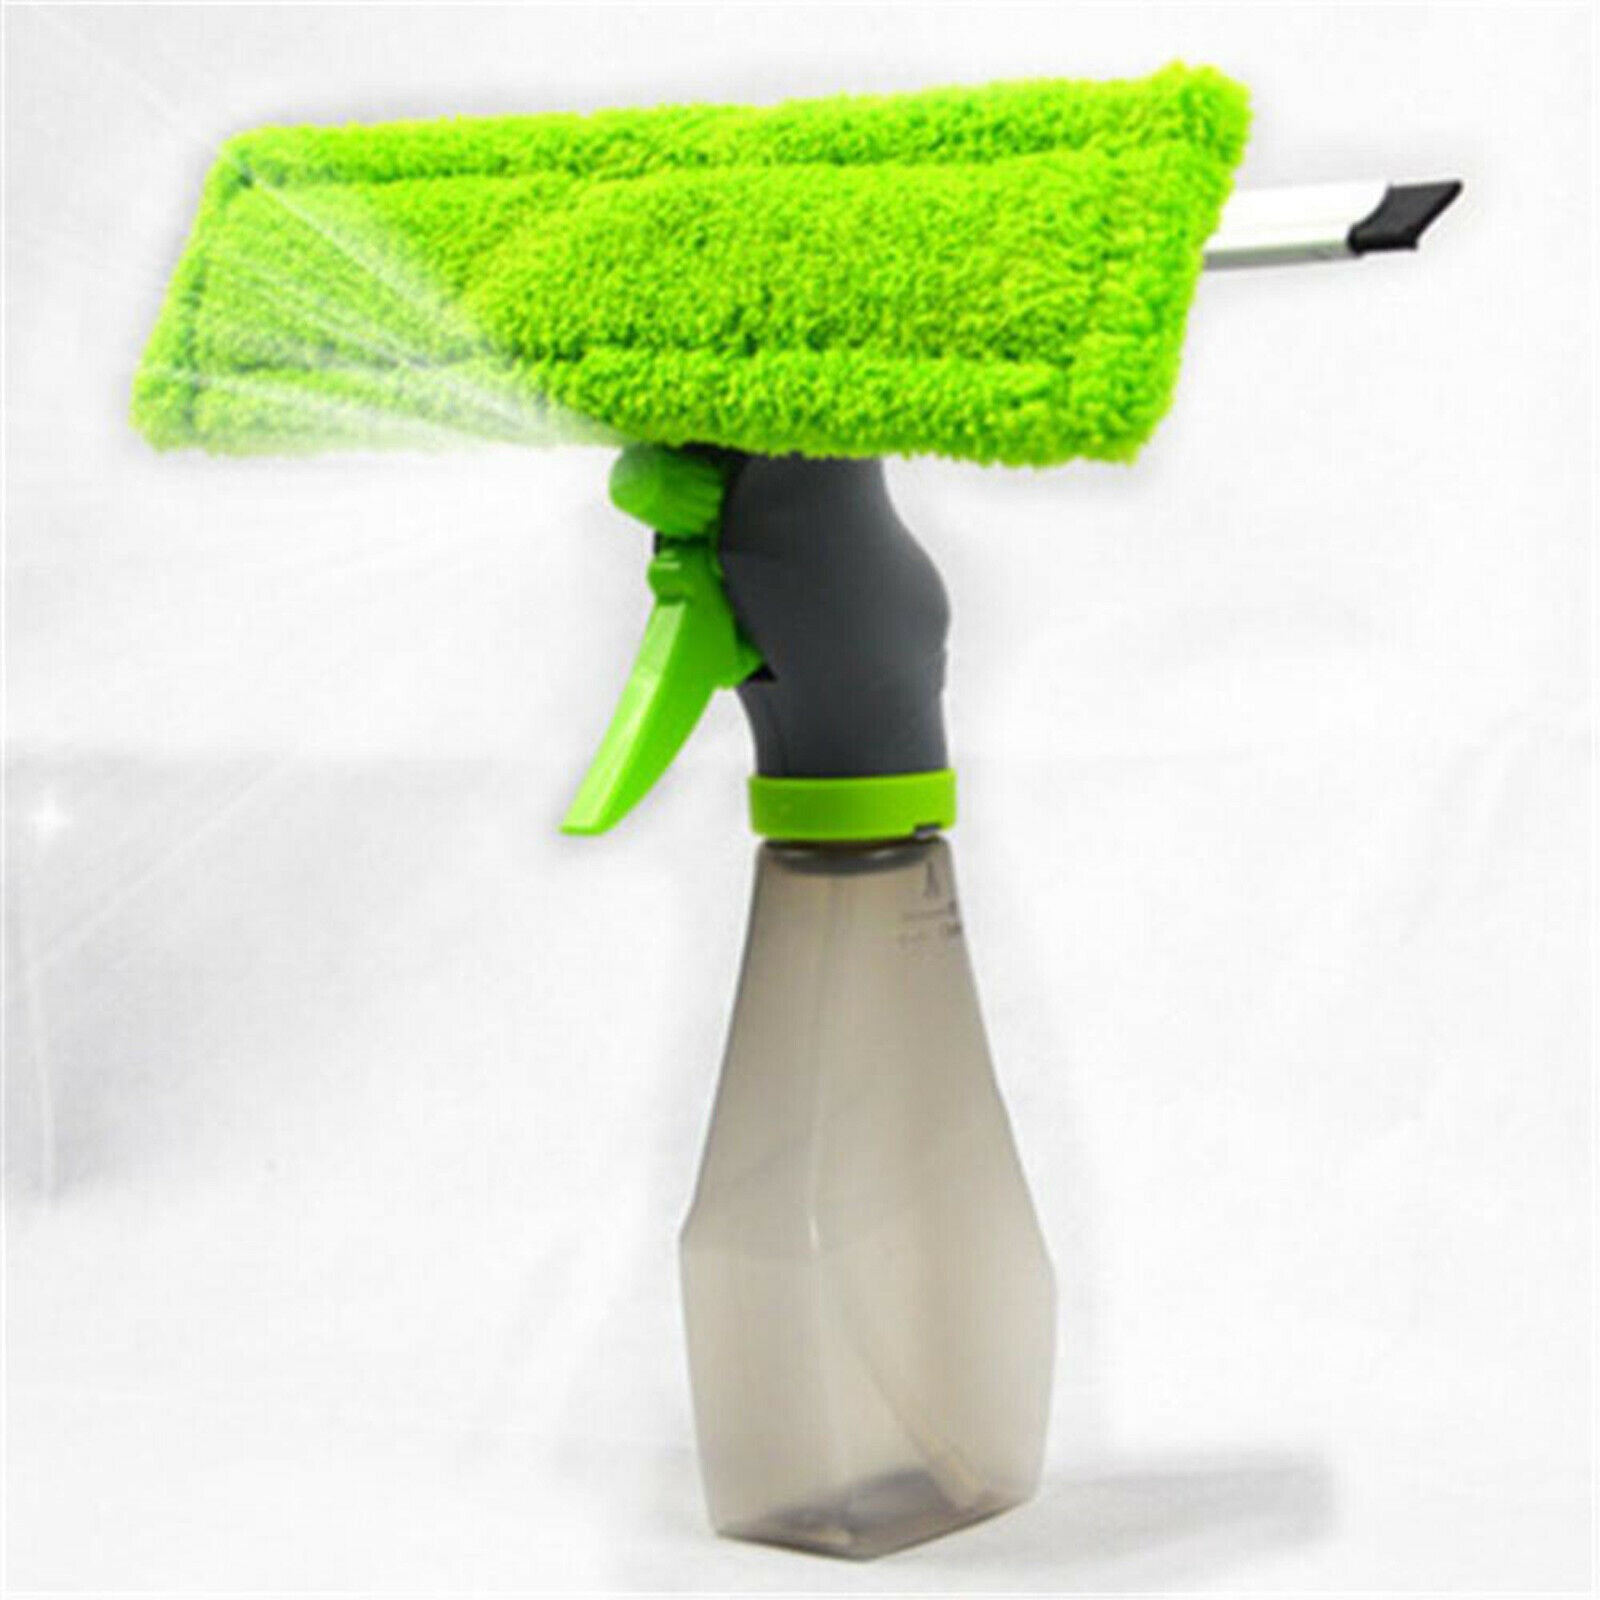 3-in-1 Window Cleaner Tool Kit Spray Bottle Rubber Squeegee Glass Cleaning